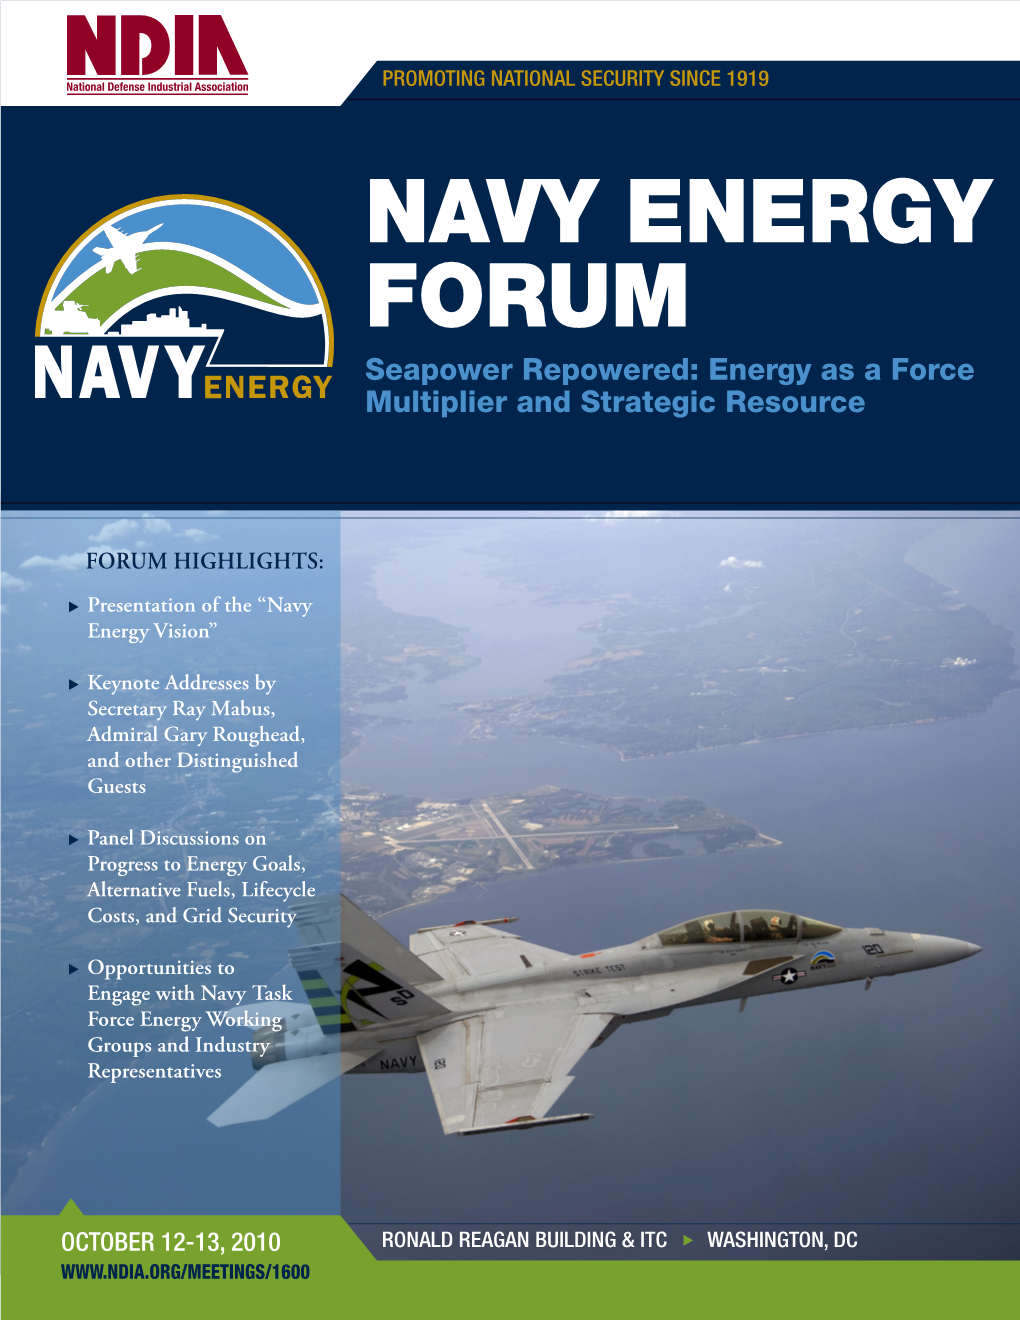 NAVY ENERGY FORUM Seapower Repowered: Energy As a Force Multiplier and Strategic Resource